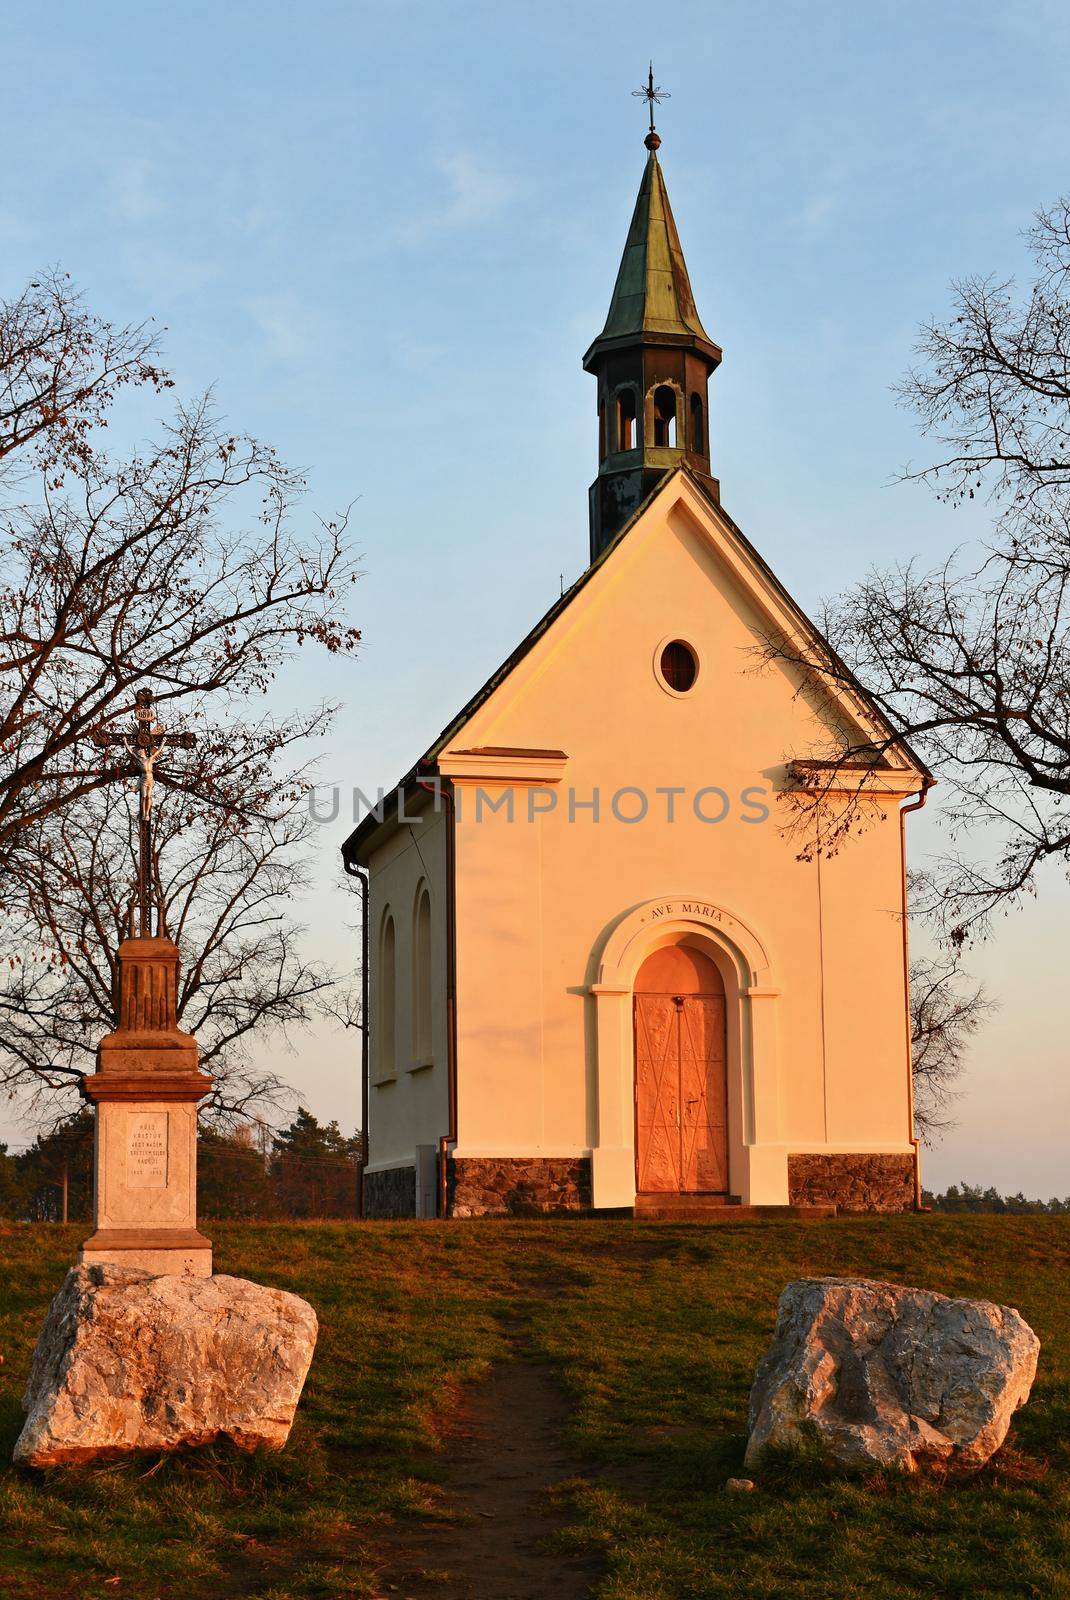 Beautiful little chapel. The Chapel of Mary Help of Christians. Central Europe - Czech Republic. South-Moravian region. The city of Brno.